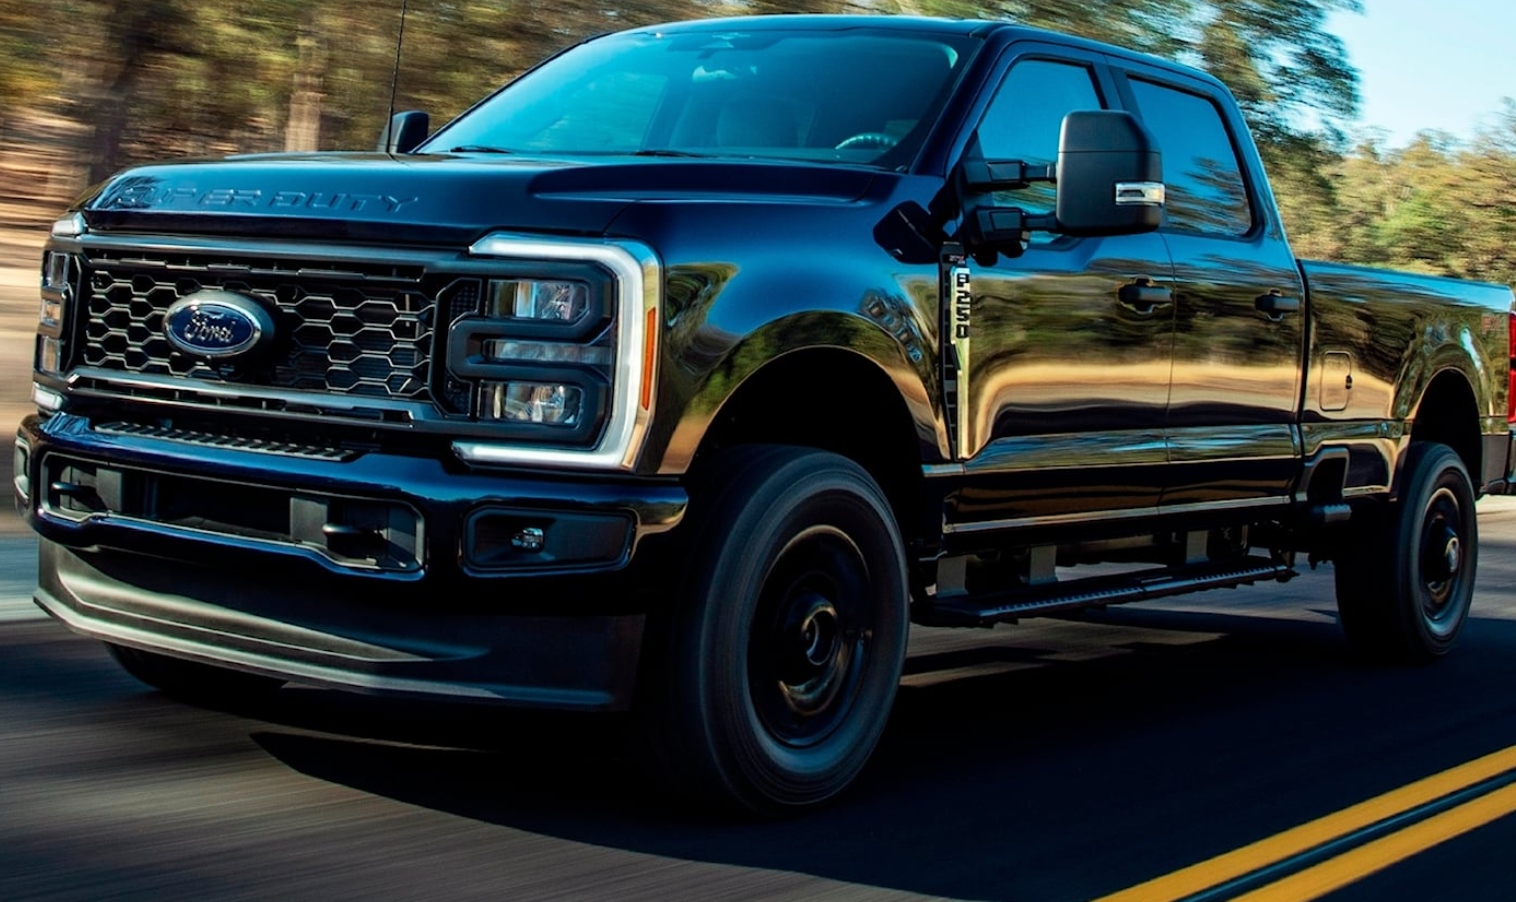 2025 Ford Super Duty Redesign: Sets New Standards in Power and